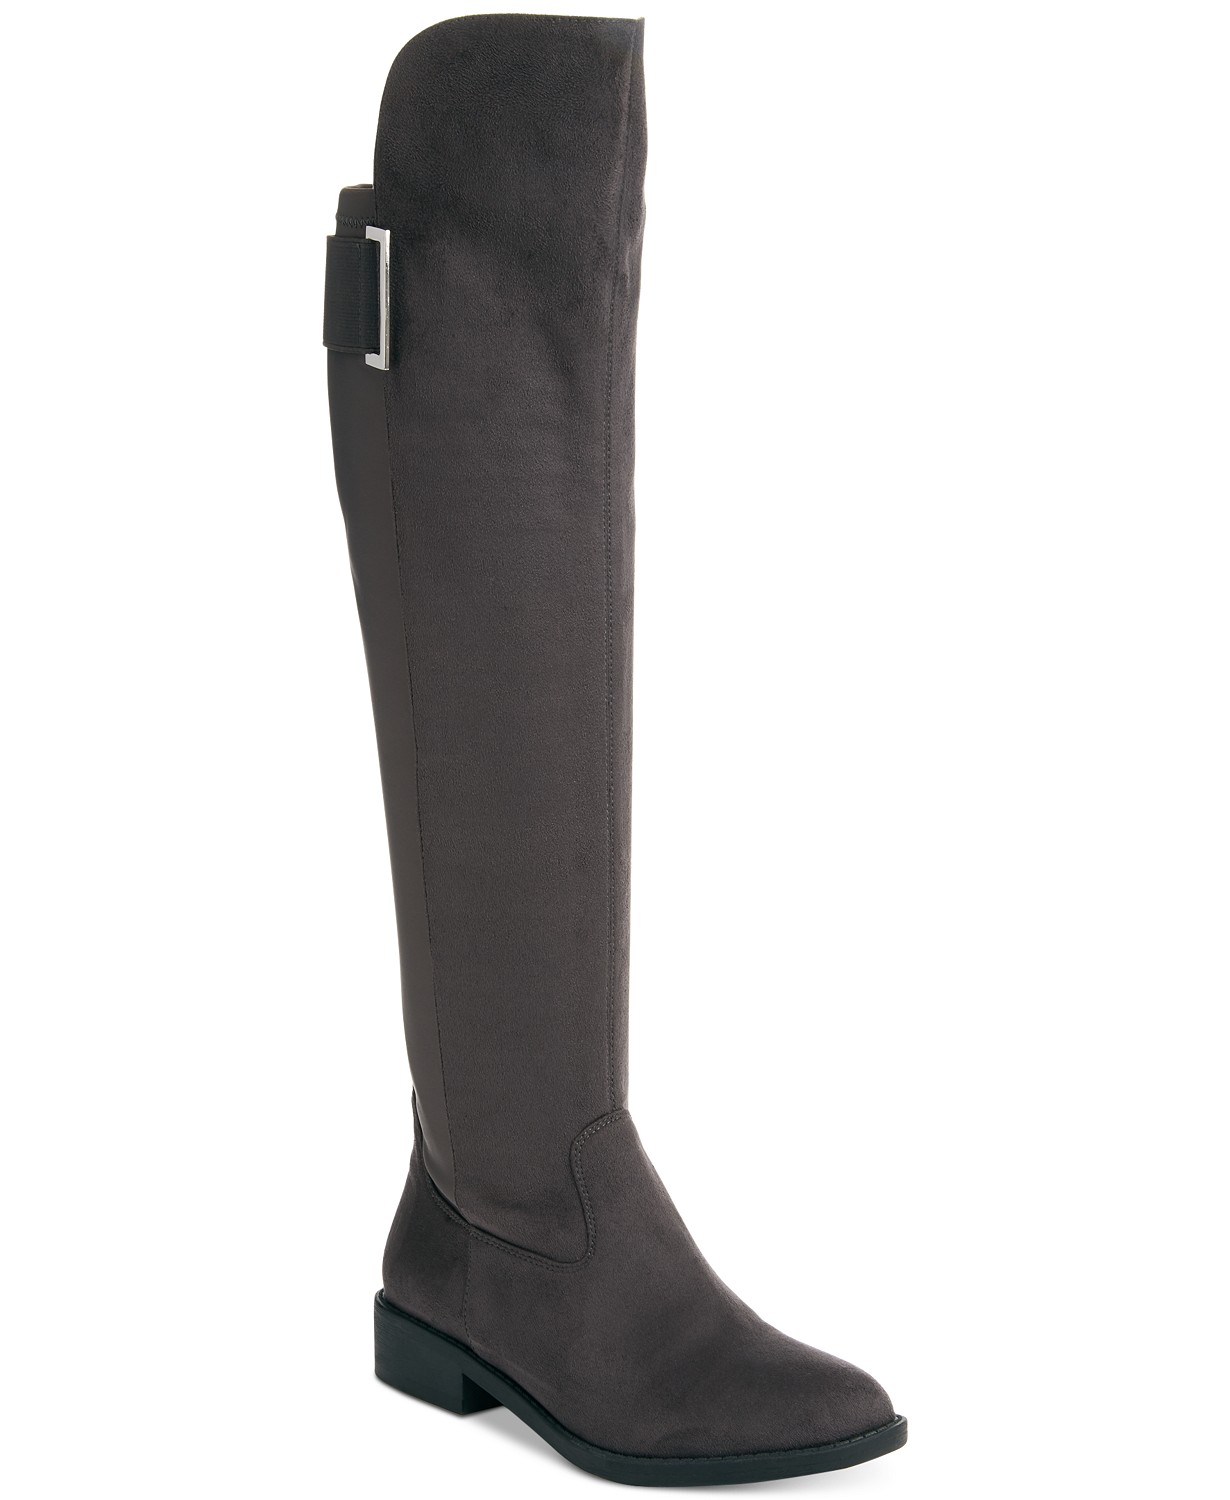 ZIGIny Onya Boots Only $19.99 at Macy’s!